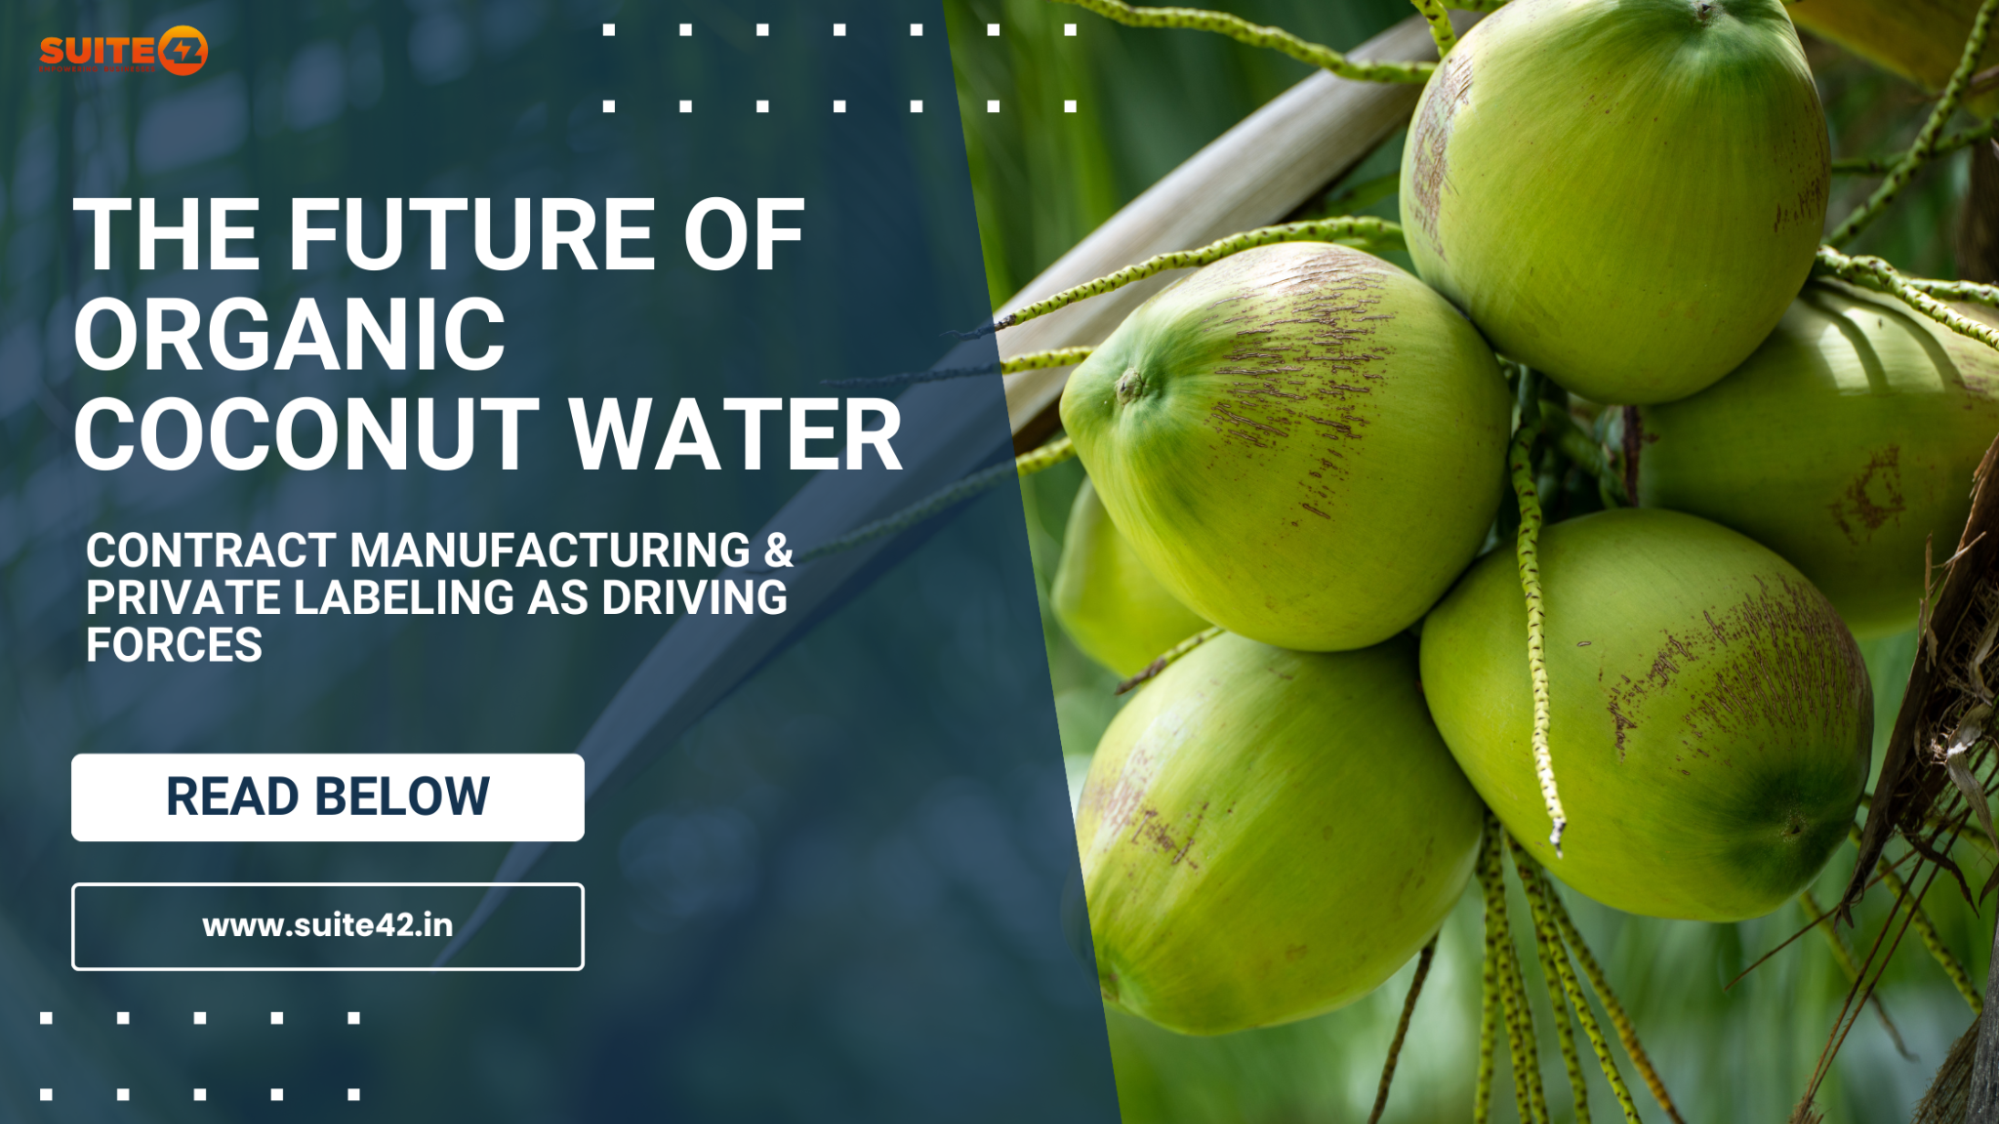 Organic Coconut Water: Contract Manufacturing & Private Labelling